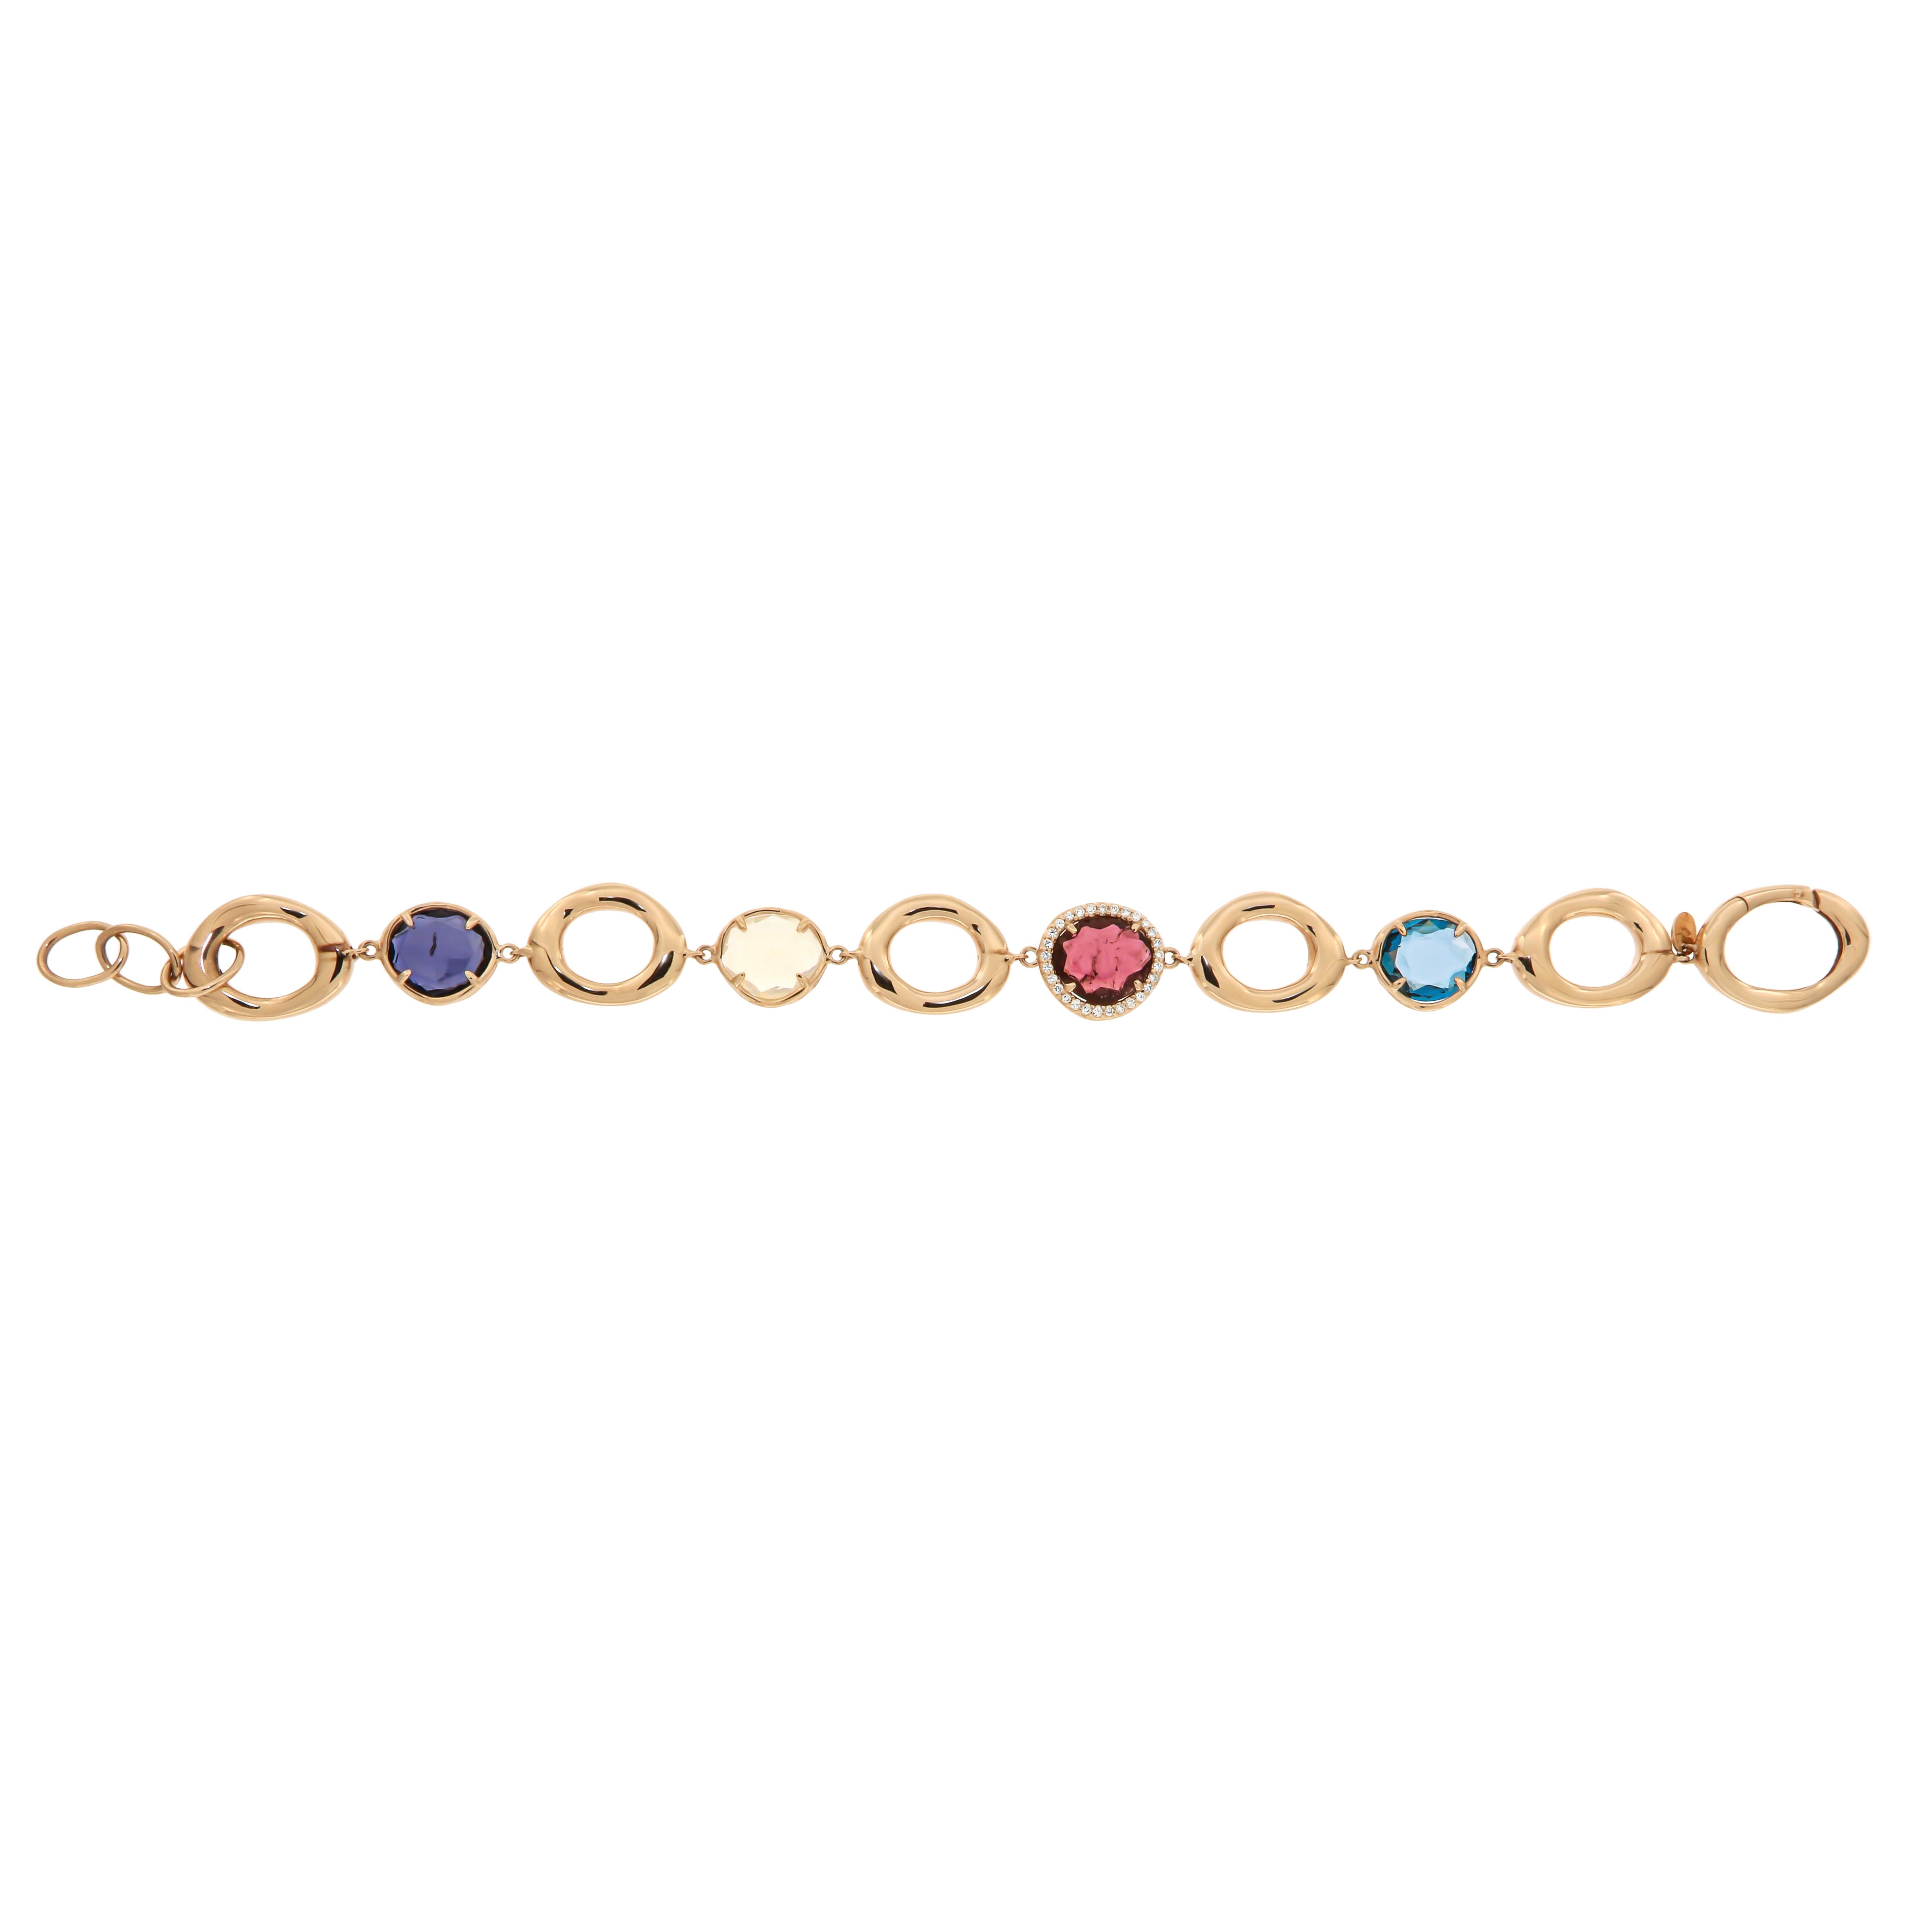 Necklace Rose Gold 18 K (Matching Bracelet and Ring Available)
London Blue Topaz 
Opal
Pink Tourmaline

Weight 19.9 grams
Length 90 cm

With a heritage of ancient fine Swiss jewelry traditions, NATKINA is a Geneva based jewellery brand, which